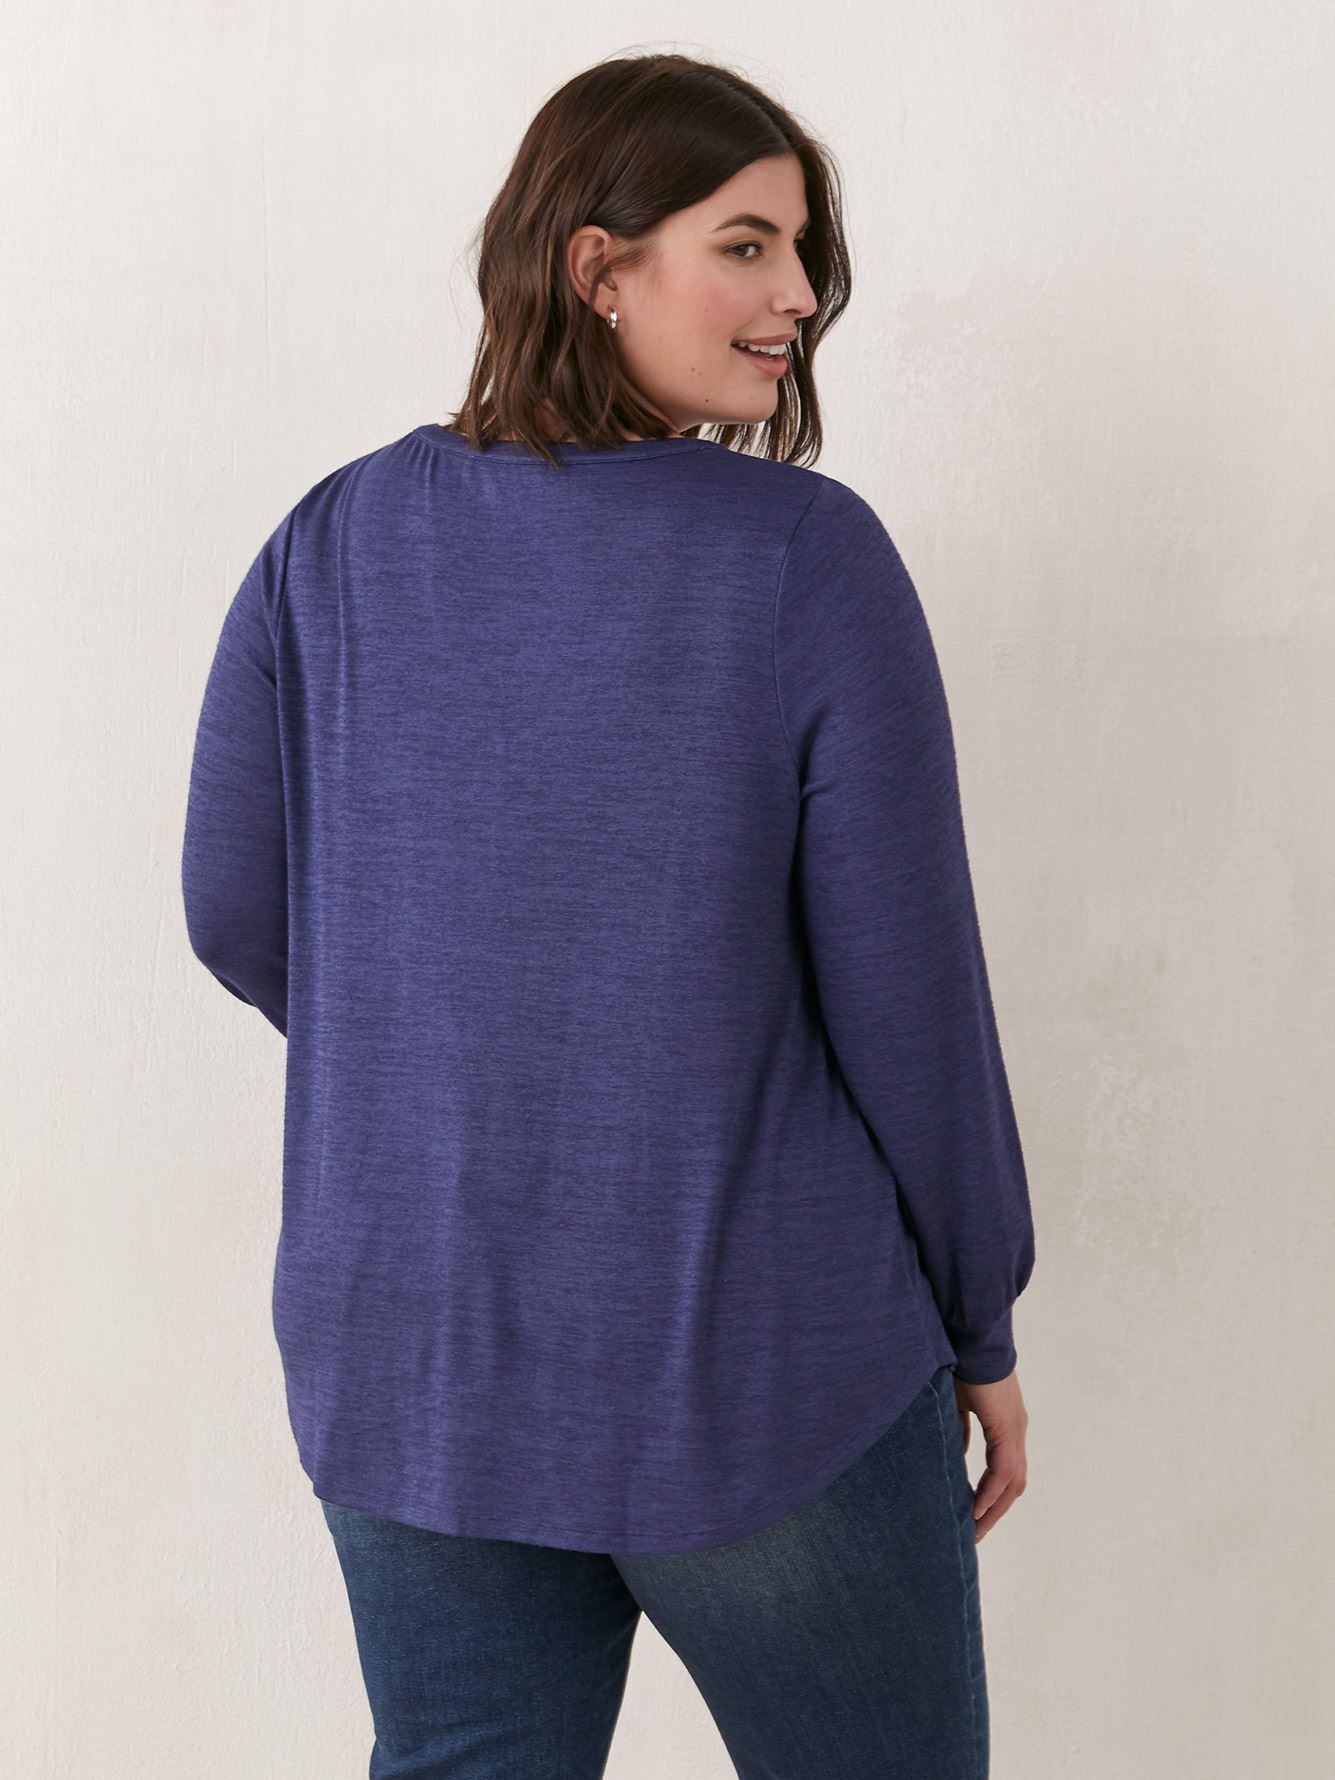 Long-Sleeve Top With Buttons - In Every Story | Penningtons